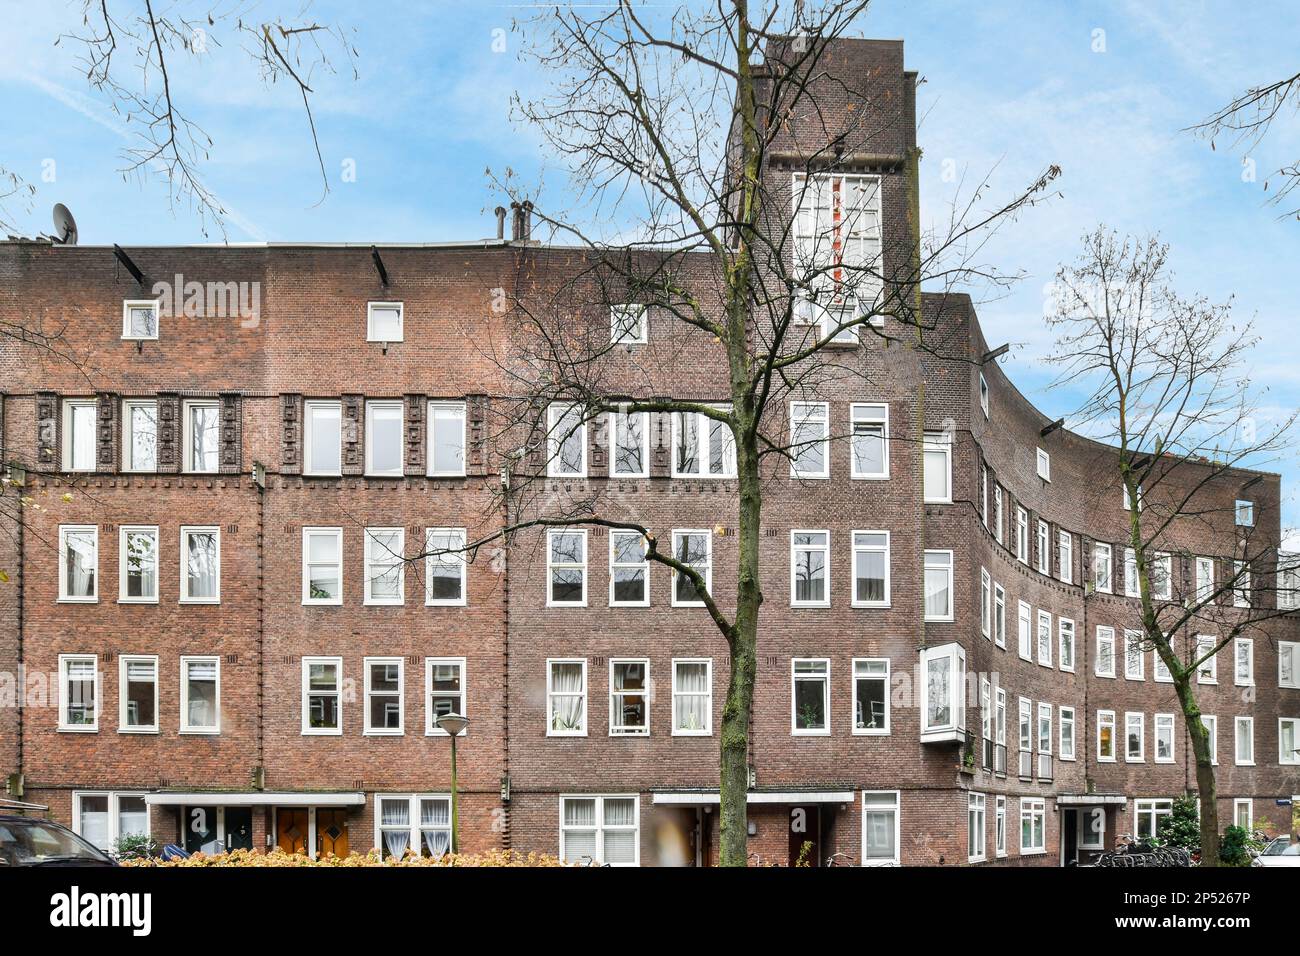 Amsterdam, Netherlands - 10 April, 2021: an apartment building with cars parked on the street next to it and a clock tower in the top right corner Stock Photo